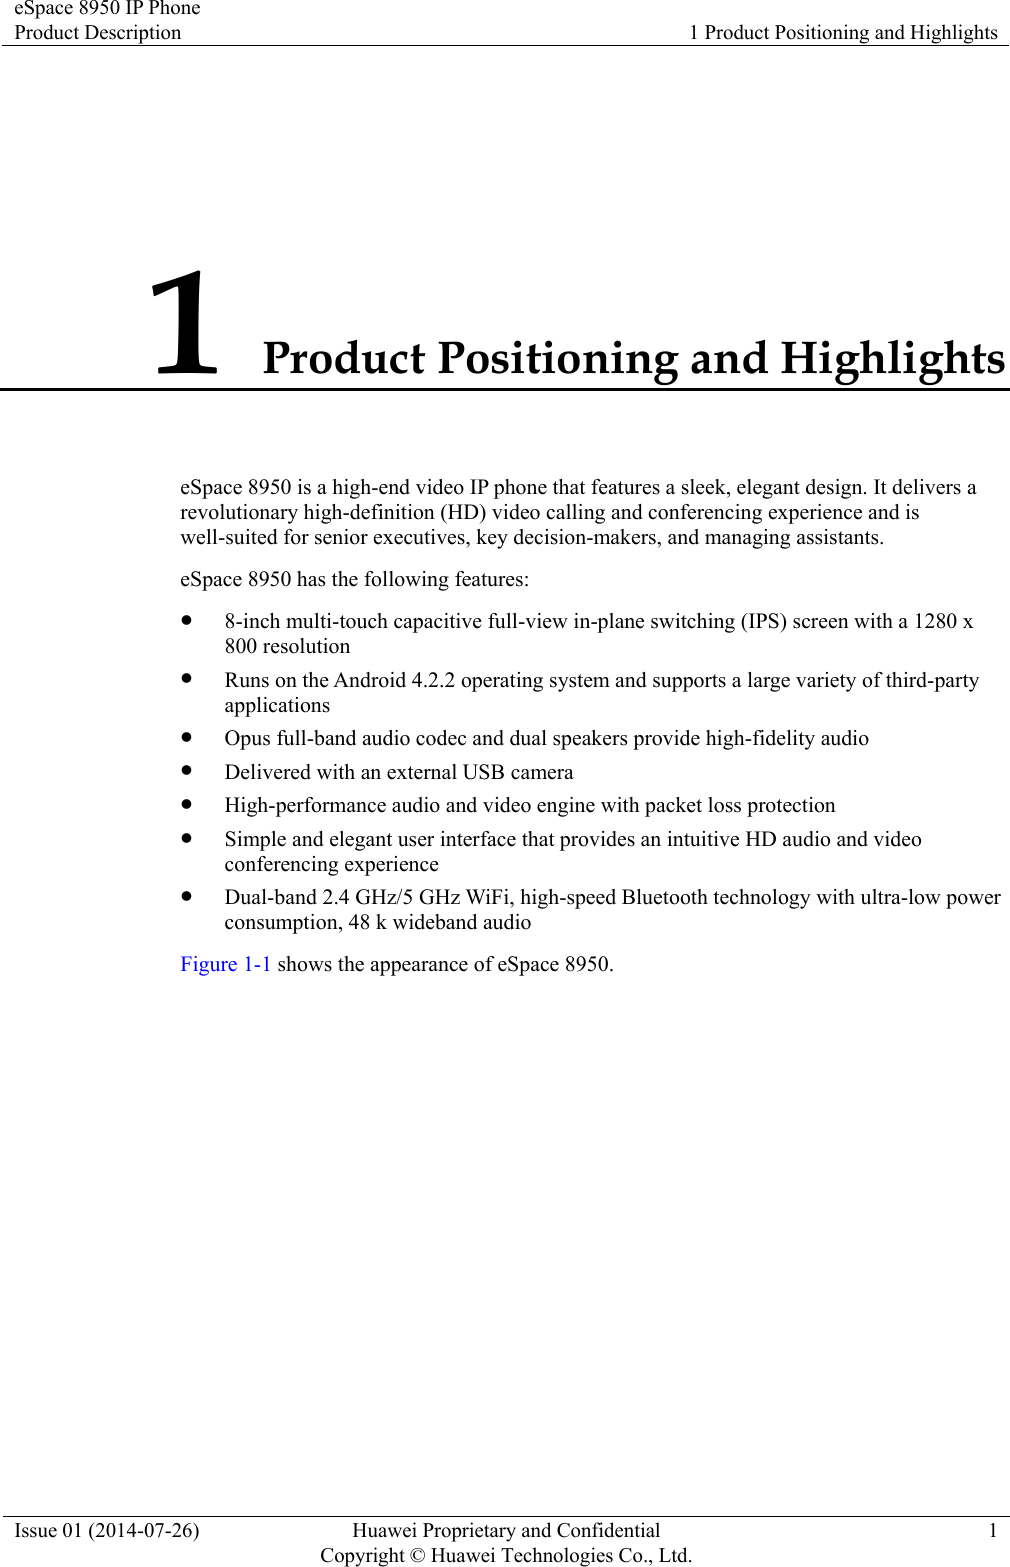 eSpace 8950 IP Phone Product Description  1 Product Positioning and Highlights Issue 01 (2014-07-26)  Huawei Proprietary and Confidential         Copyright © Huawei Technologies Co., Ltd.1 1 Product Positioning and Highlights eSpace 8950 is a high-end video IP phone that features a sleek, elegant design. It delivers a revolutionary high-definition (HD) video calling and conferencing experience and is well-suited for senior executives, key decision-makers, and managing assistants. eSpace 8950 has the following features:  8-inch multi-touch capacitive full-view in-plane switching (IPS) screen with a 1280 x 800 resolution  Runs on the Android 4.2.2 operating system and supports a large variety of third-party applications  Opus full-band audio codec and dual speakers provide high-fidelity audio  Delivered with an external USB camera  High-performance audio and video engine with packet loss protection  Simple and elegant user interface that provides an intuitive HD audio and video conferencing experience  Dual-band 2.4 GHz/5 GHz WiFi, high-speed Bluetooth technology with ultra-low power consumption, 48 k wideband audio Figure 1-1 shows the appearance of eSpace 8950. 